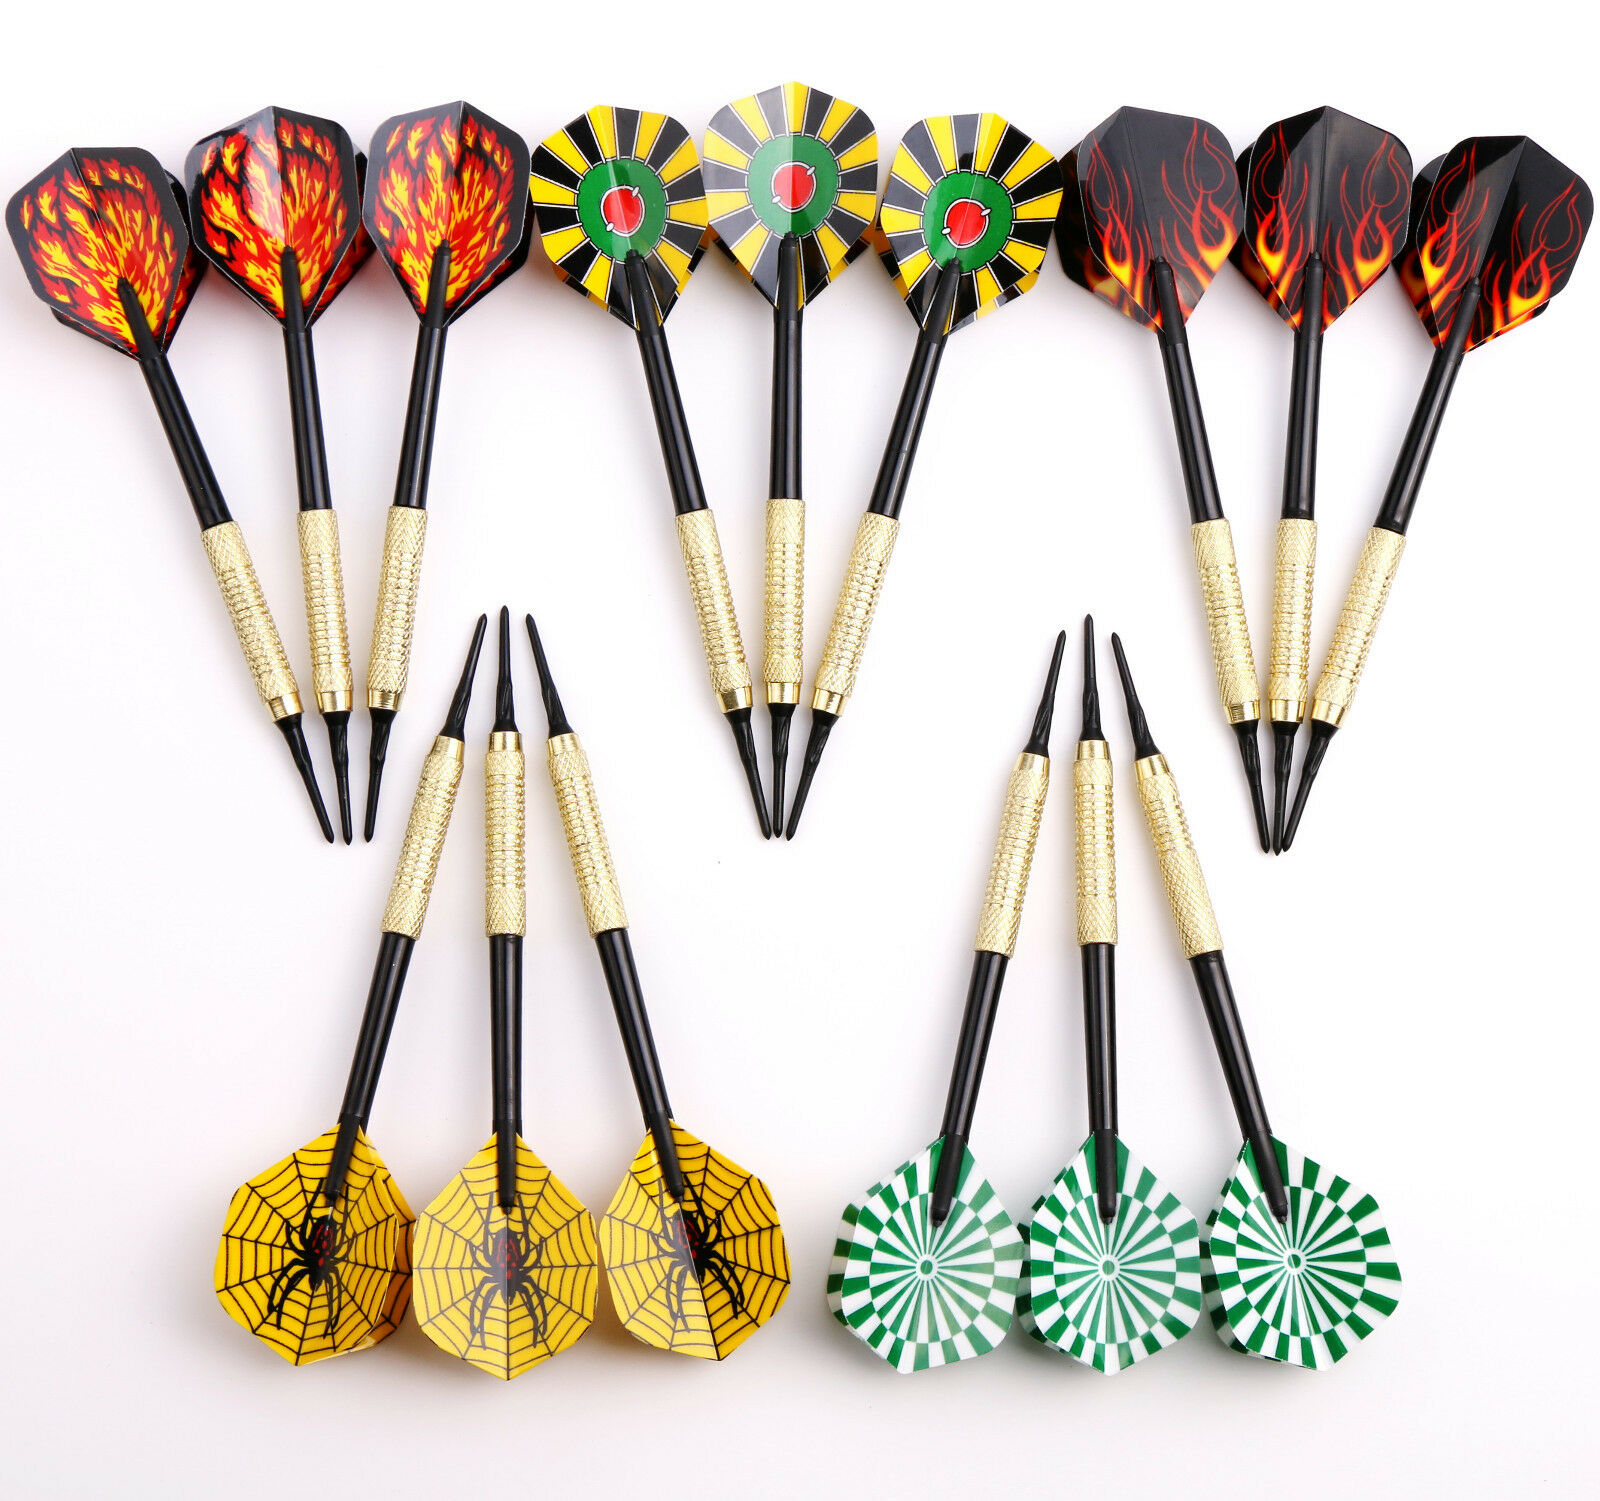 15 Packs Of Dart Soft Tip Darts For Electronic Dartboard Plactic Tips Points Us